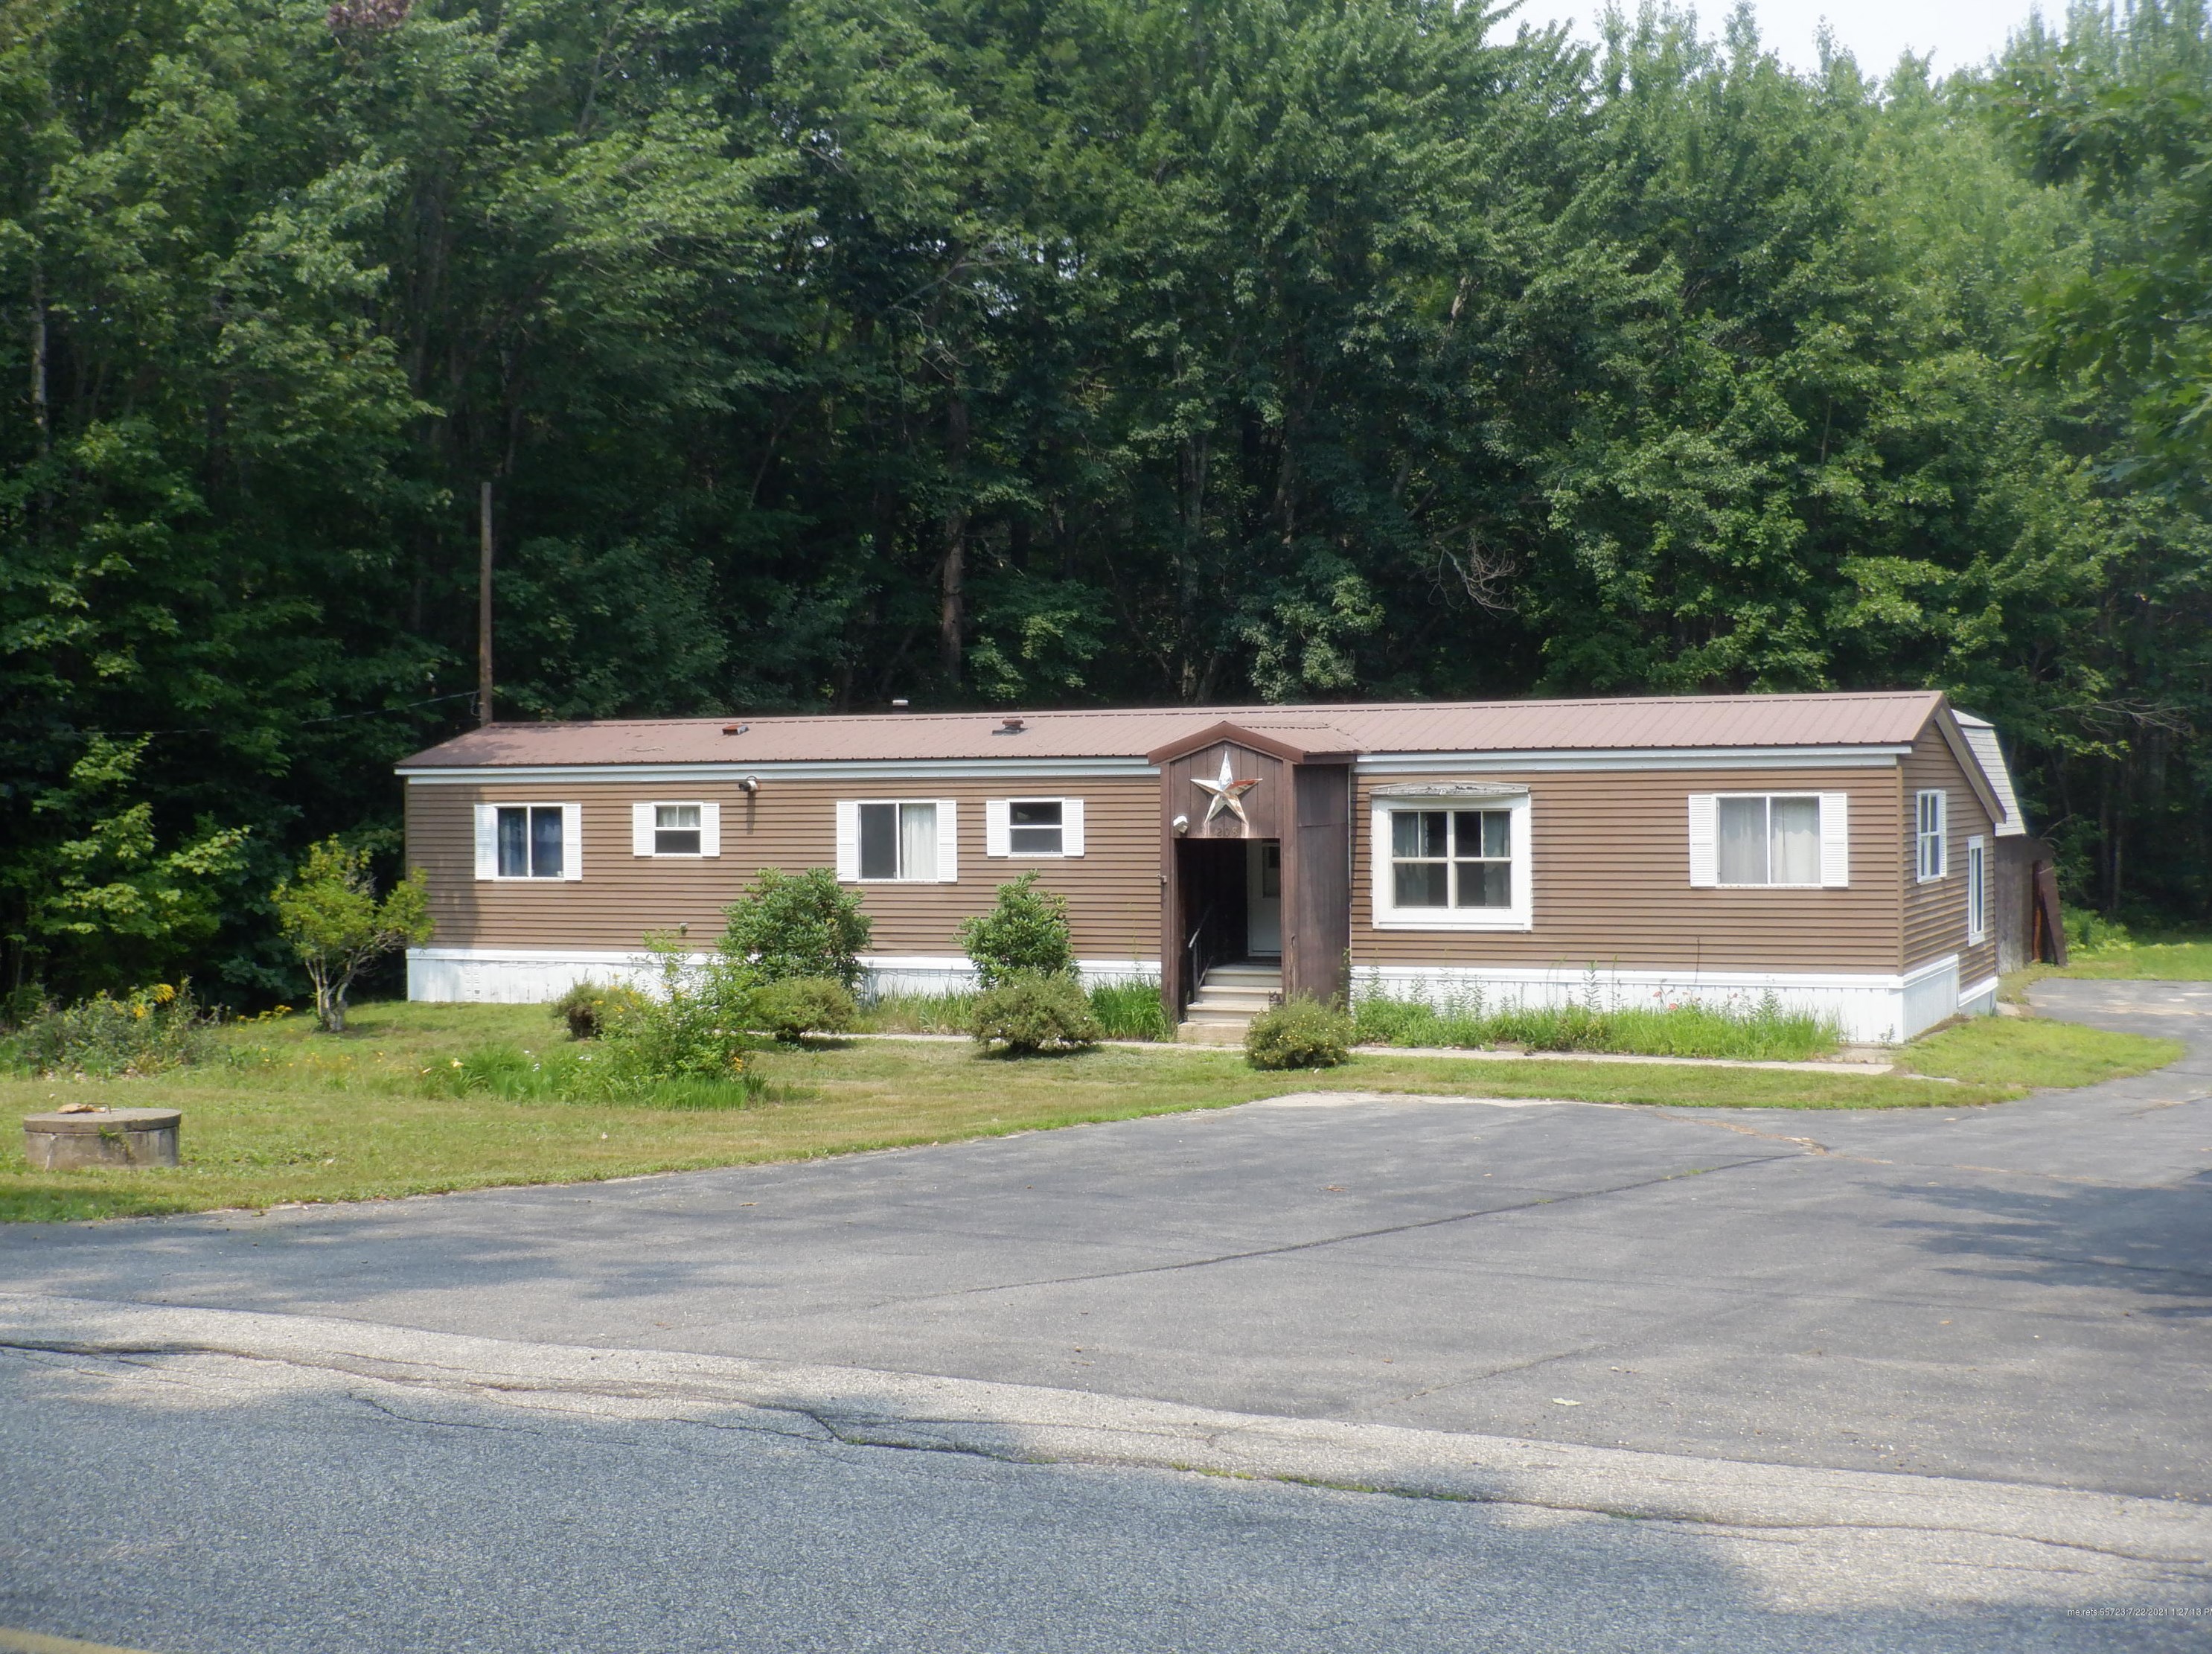 208 Old Orchard Rd, West-Buxton, ME 04093 exterior